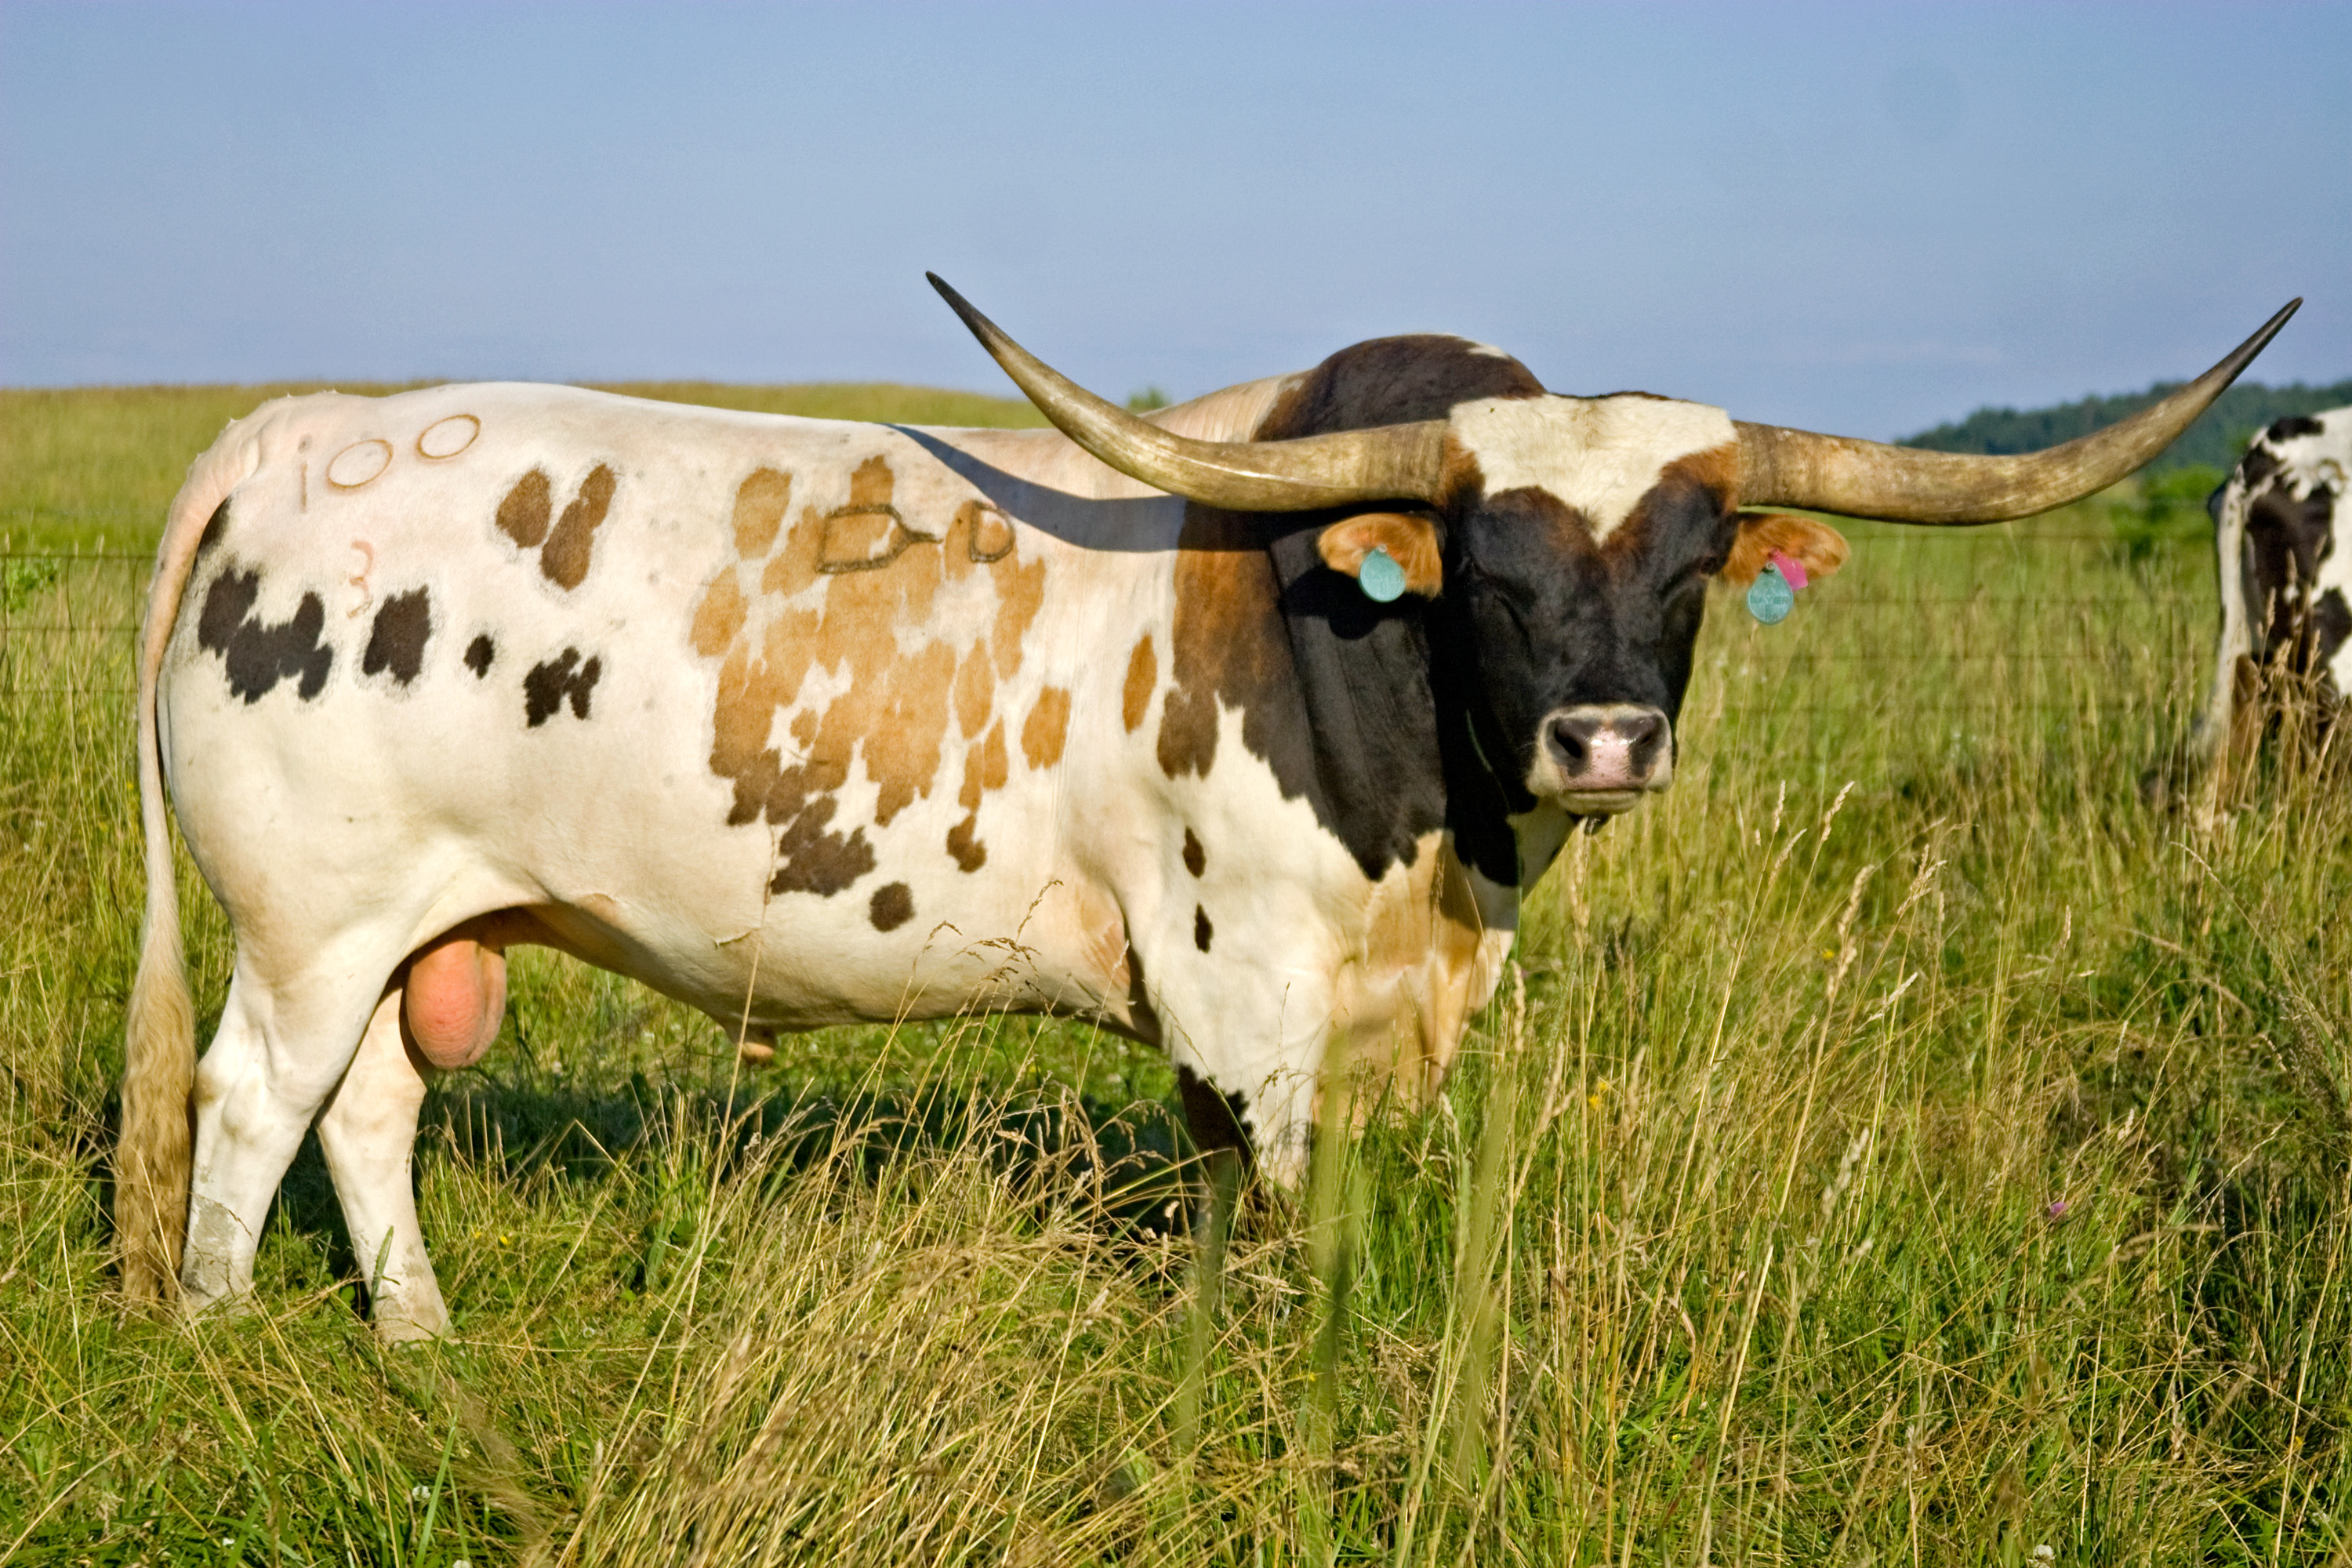 Texas Longhorn Cattle at Dickinson Cattle Co. - Photo Assortment